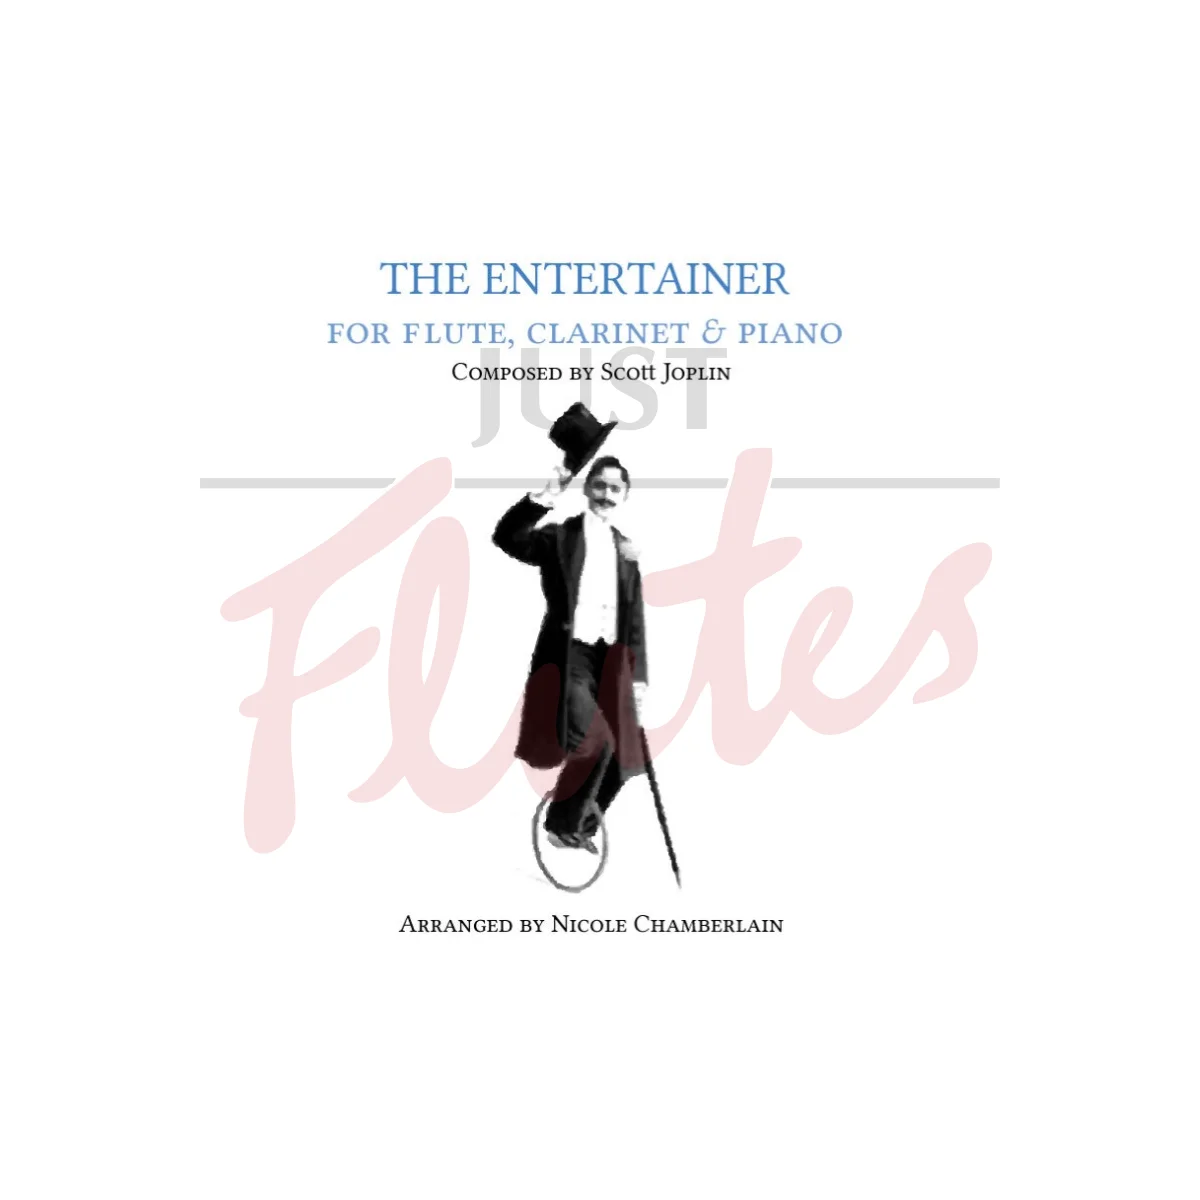 The Entertainer for Flute, Clarinet and Piano